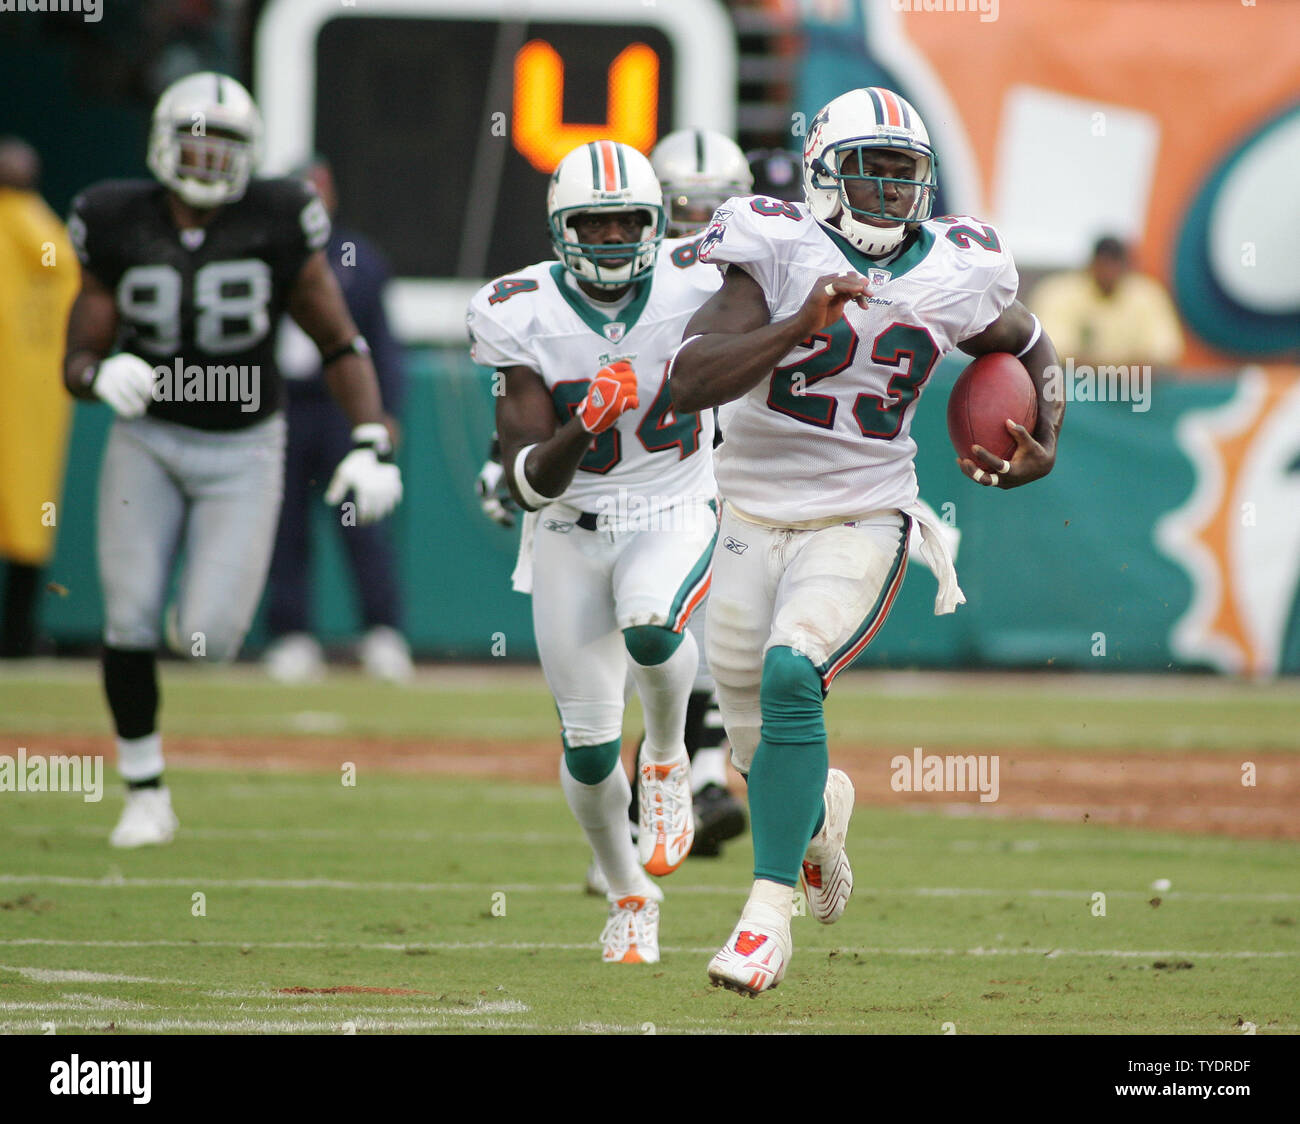 Miami Dolphins running back Ronnie Brown (23) breaks this second quarter  run for 60 yards against the Oakland Raiders at Dolphin Stadium in Miami on  September 30, 2007. The Raiders defeated the